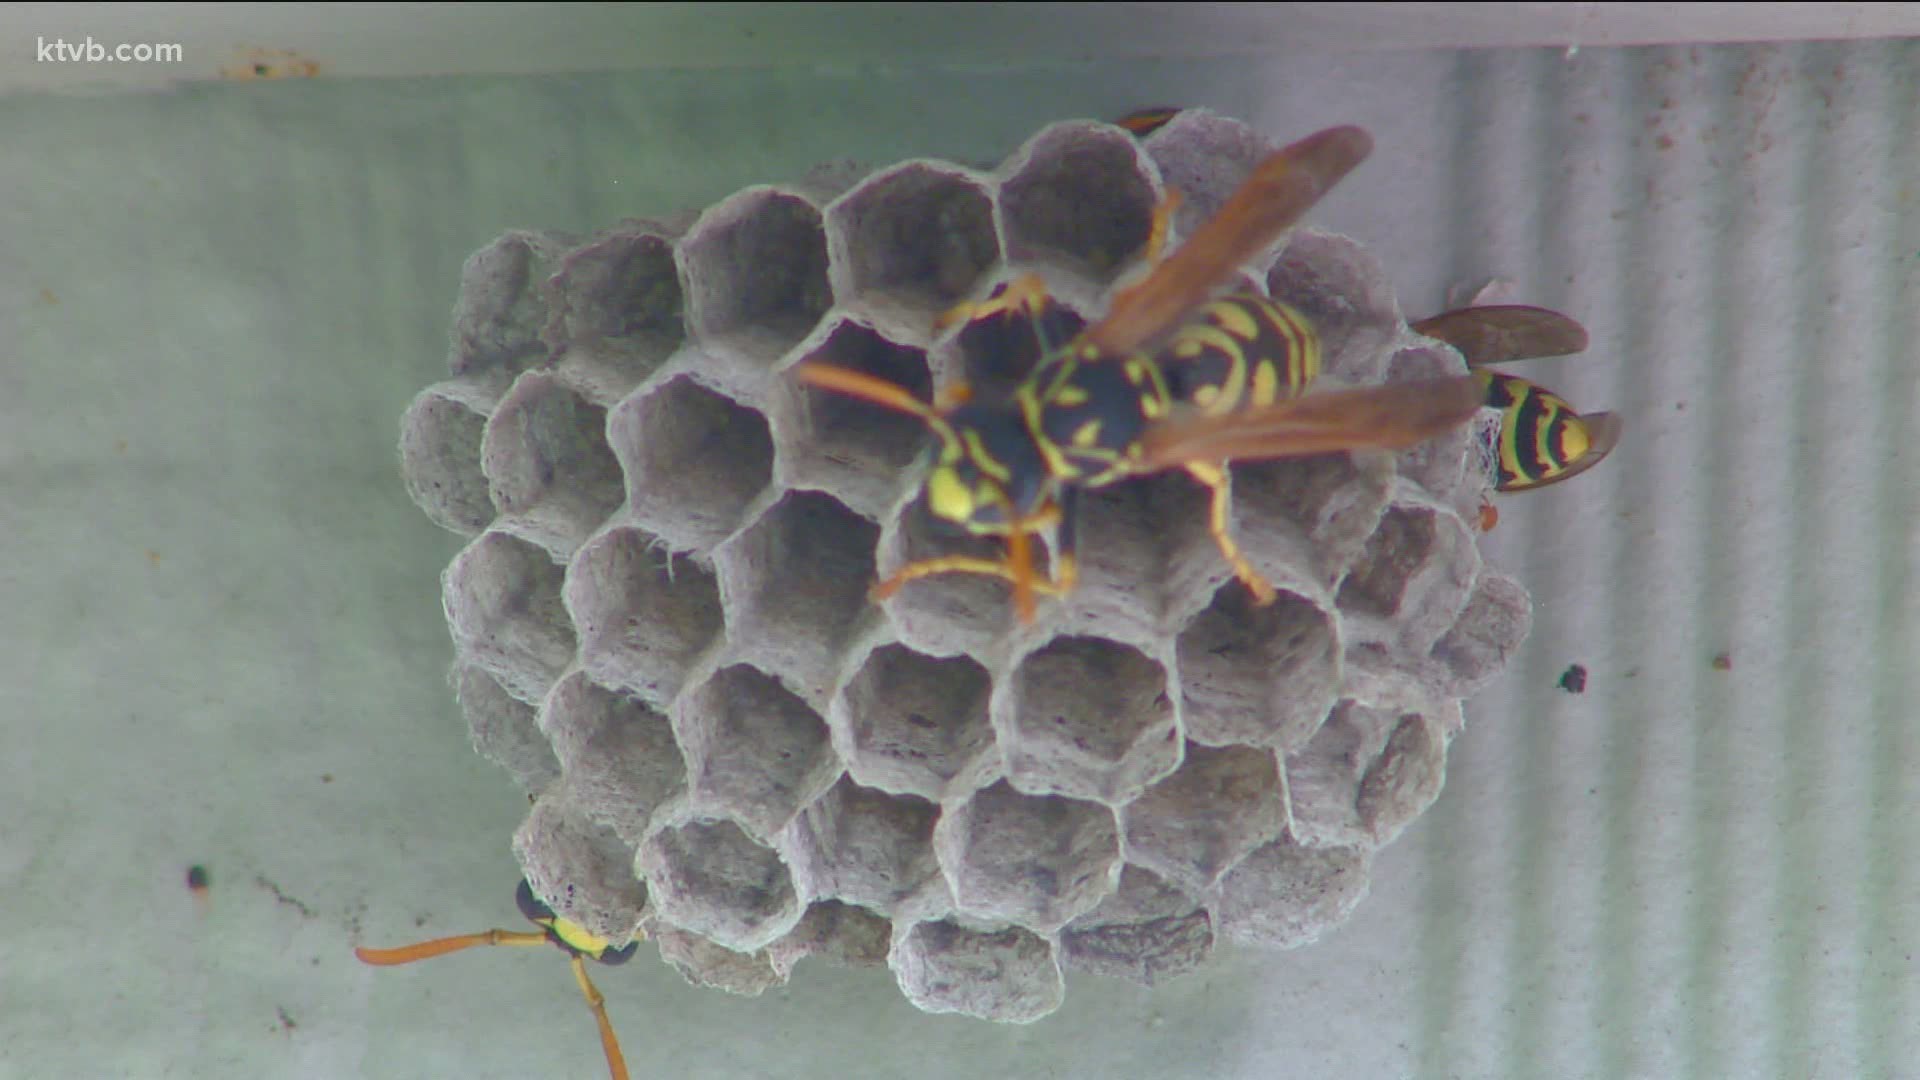 Jim Duthie has some tips on how you can control bees, wasps and hornets in your yard.